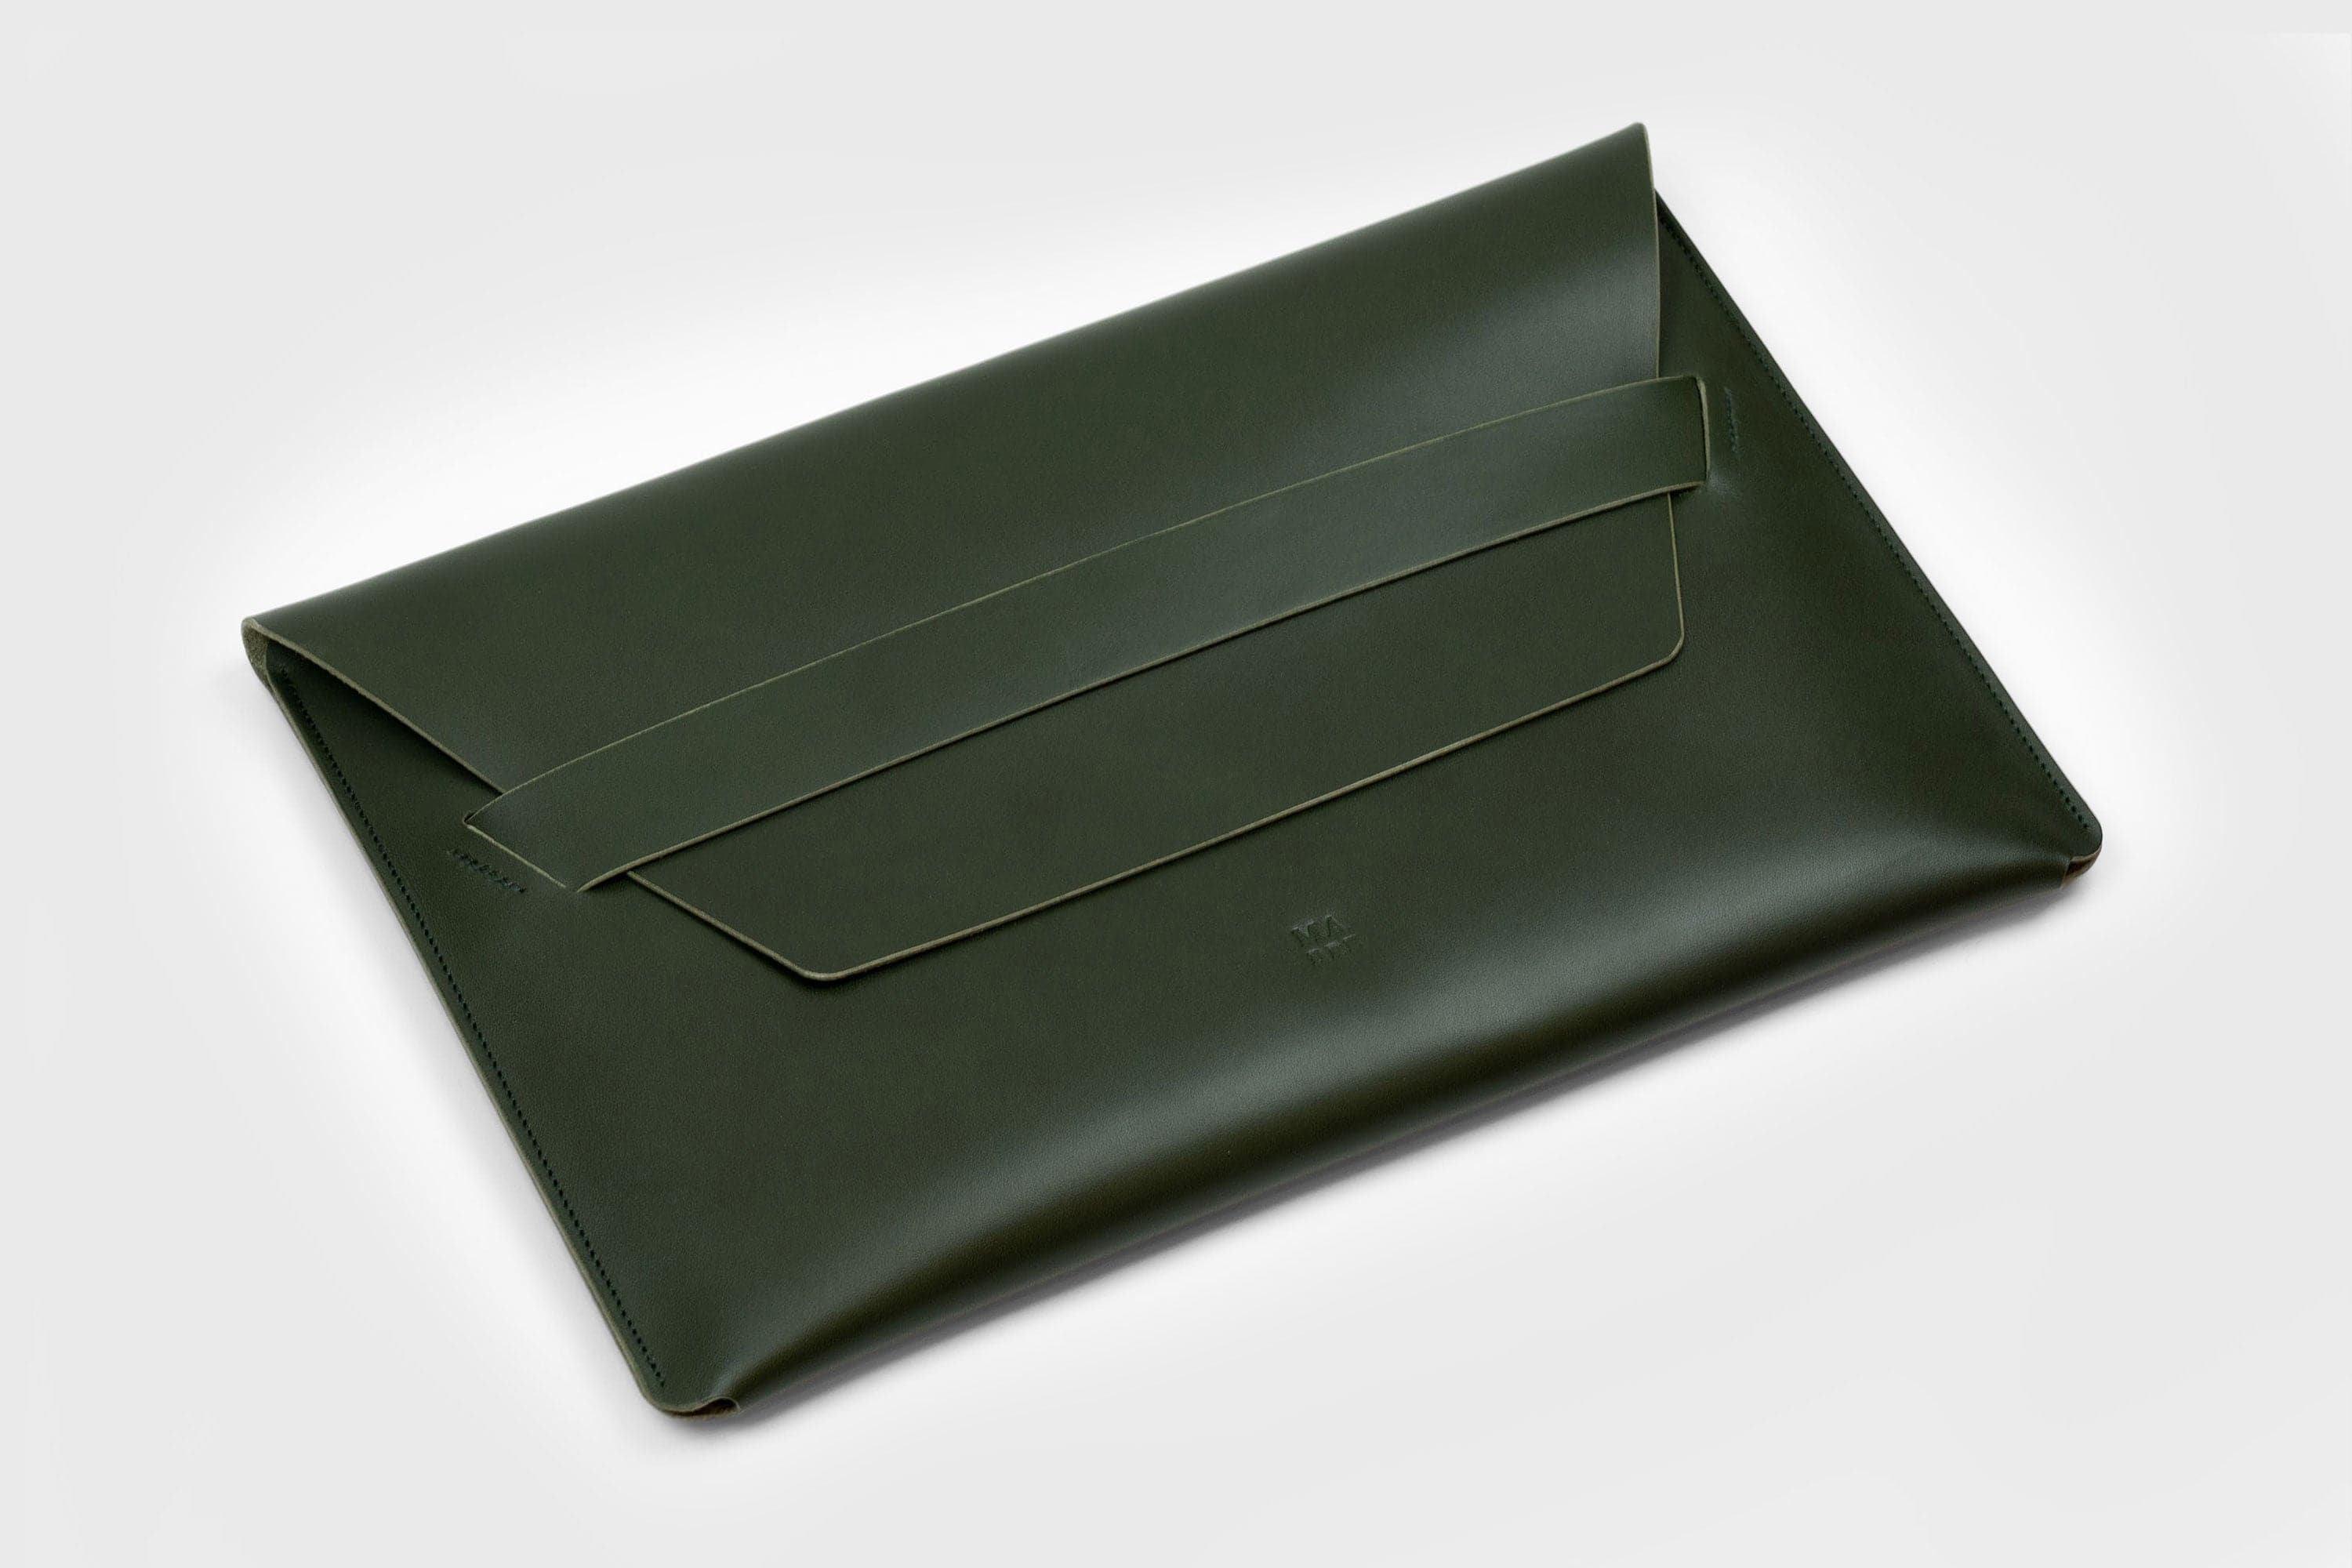 MacBook Pro 14 Inch Leather Sleeve Dark Olive Green Color Luxury Handmade and Designed By Manuel Dreesmann Atelier Madre Barcelona Spain